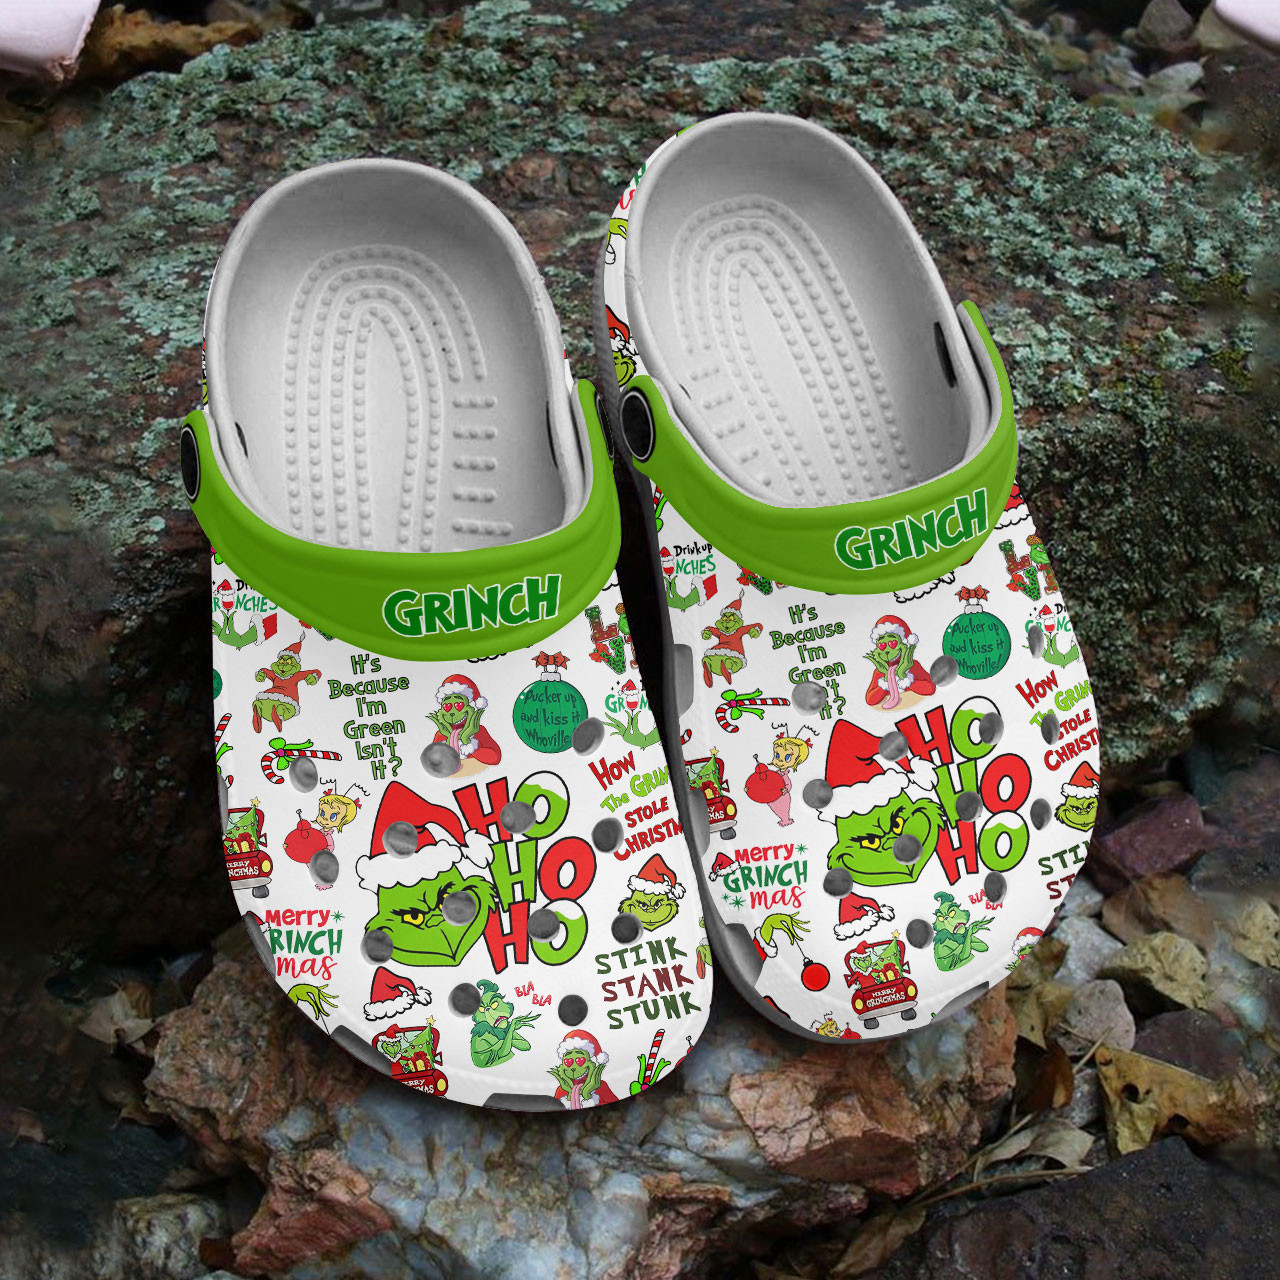 GSS0111302 3, Comfortable And Eye-catching Unisex Funny Grinch Crocs, Express Shipping Available, Comfortable, Eye-catching, Funny, Unisex